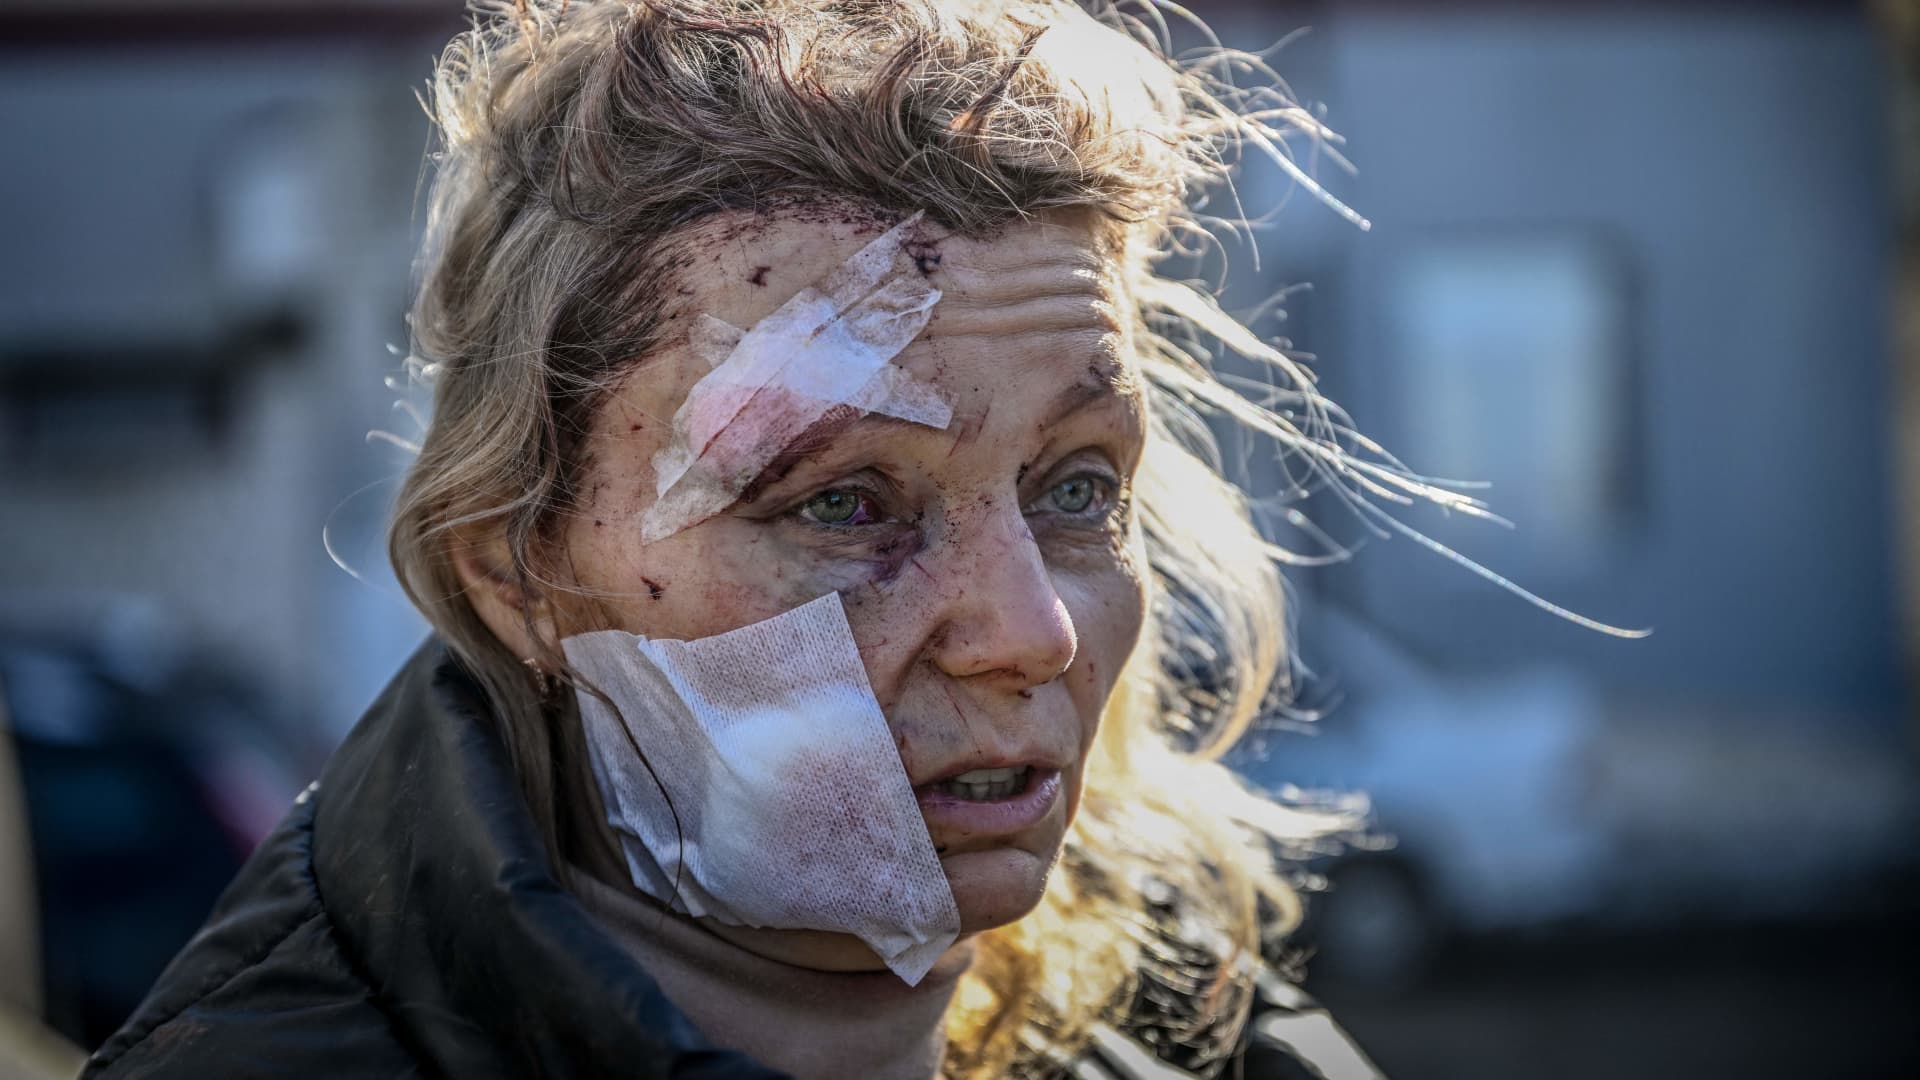 Olena Kurylo, a 52-year-old teacher, stands outside a hospital after the bombing of the eastern Ukraine town of Chuguiv on Feb. 24, 2022. Russian armed forces attempted to invade Ukraine from several directions, using rocket systems and helicopters to attack Ukrainian position in the south, the border guard service said.